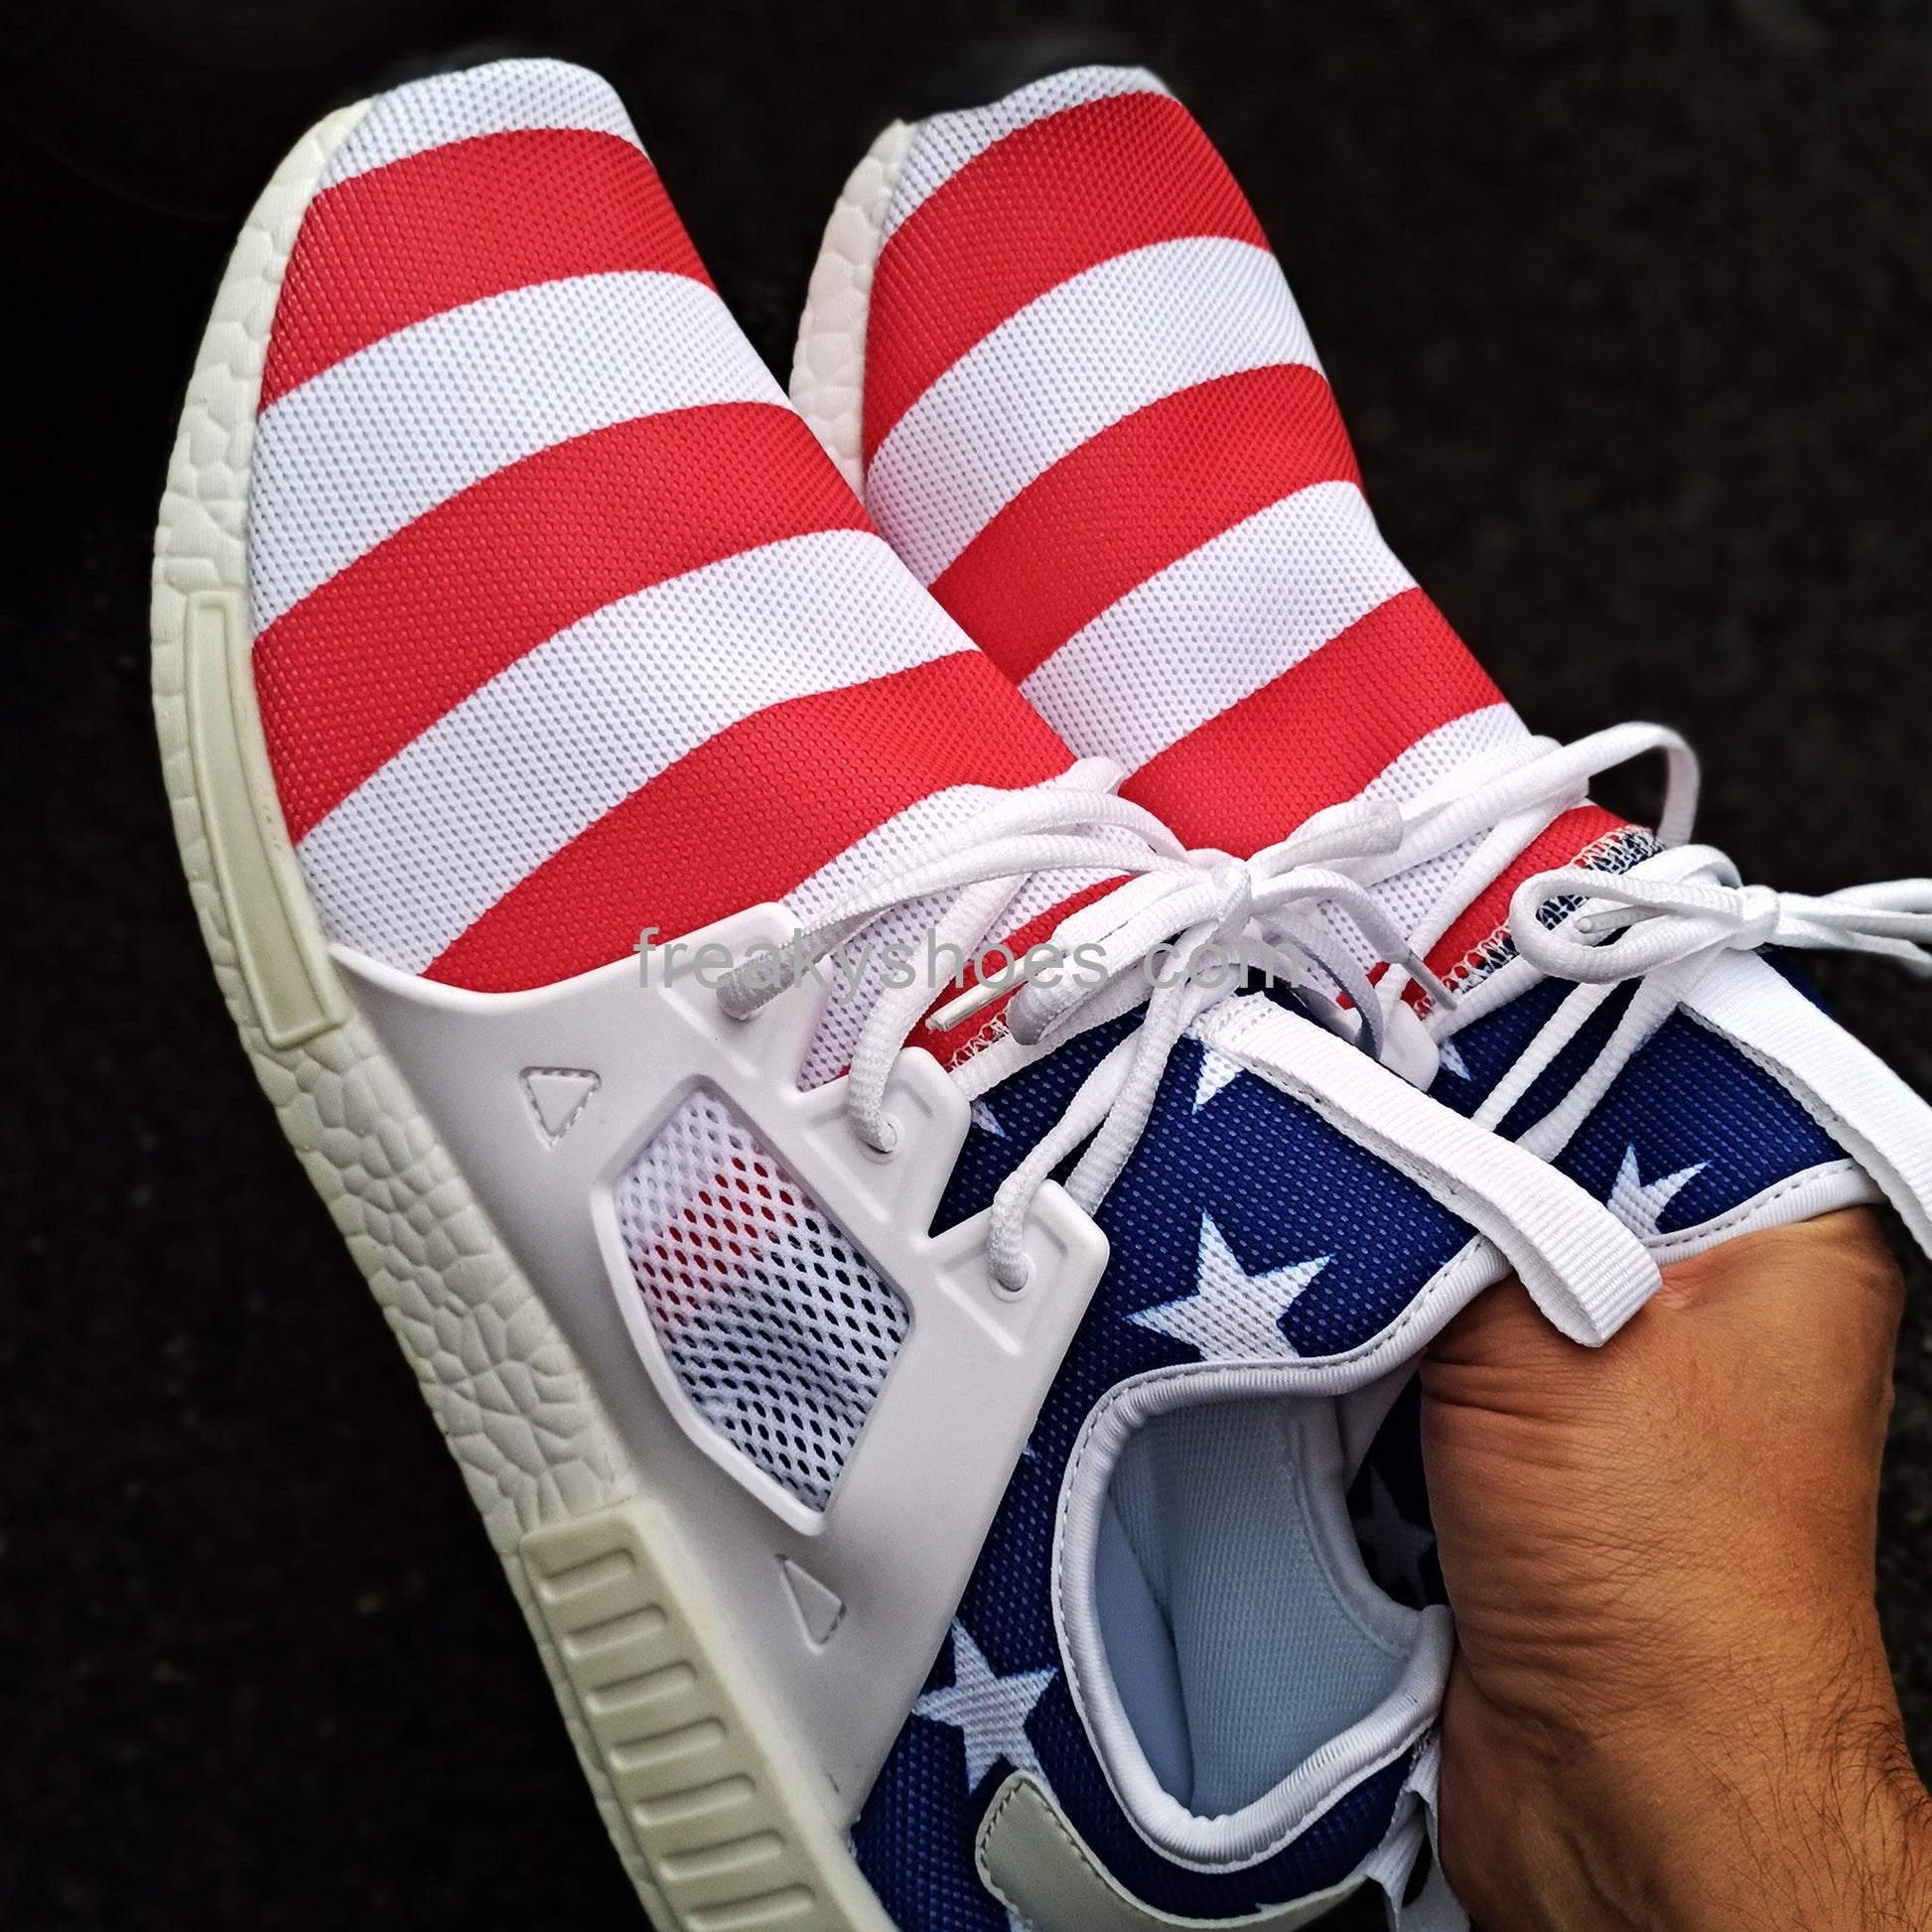 Stars & Stripes - Freaky Shoes®